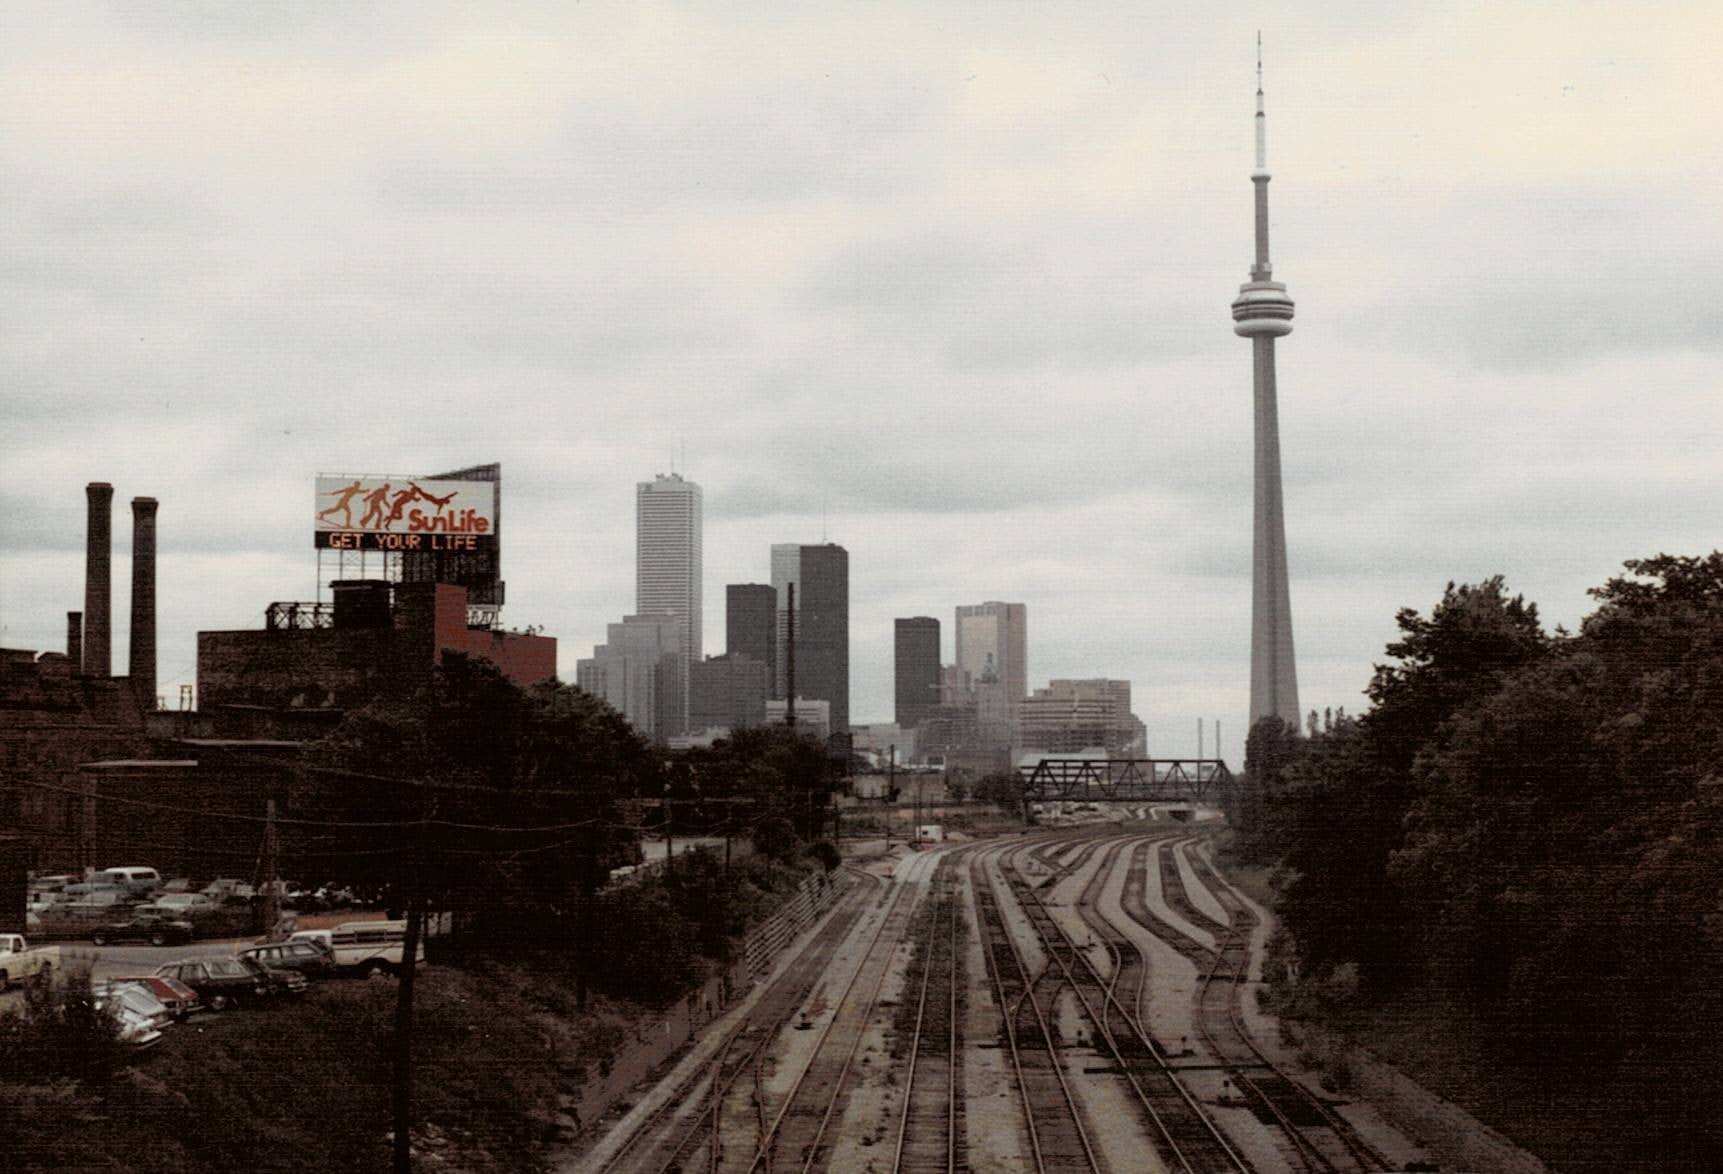 Taken in fall 1985 looking east from around Fort York. Totally different now.